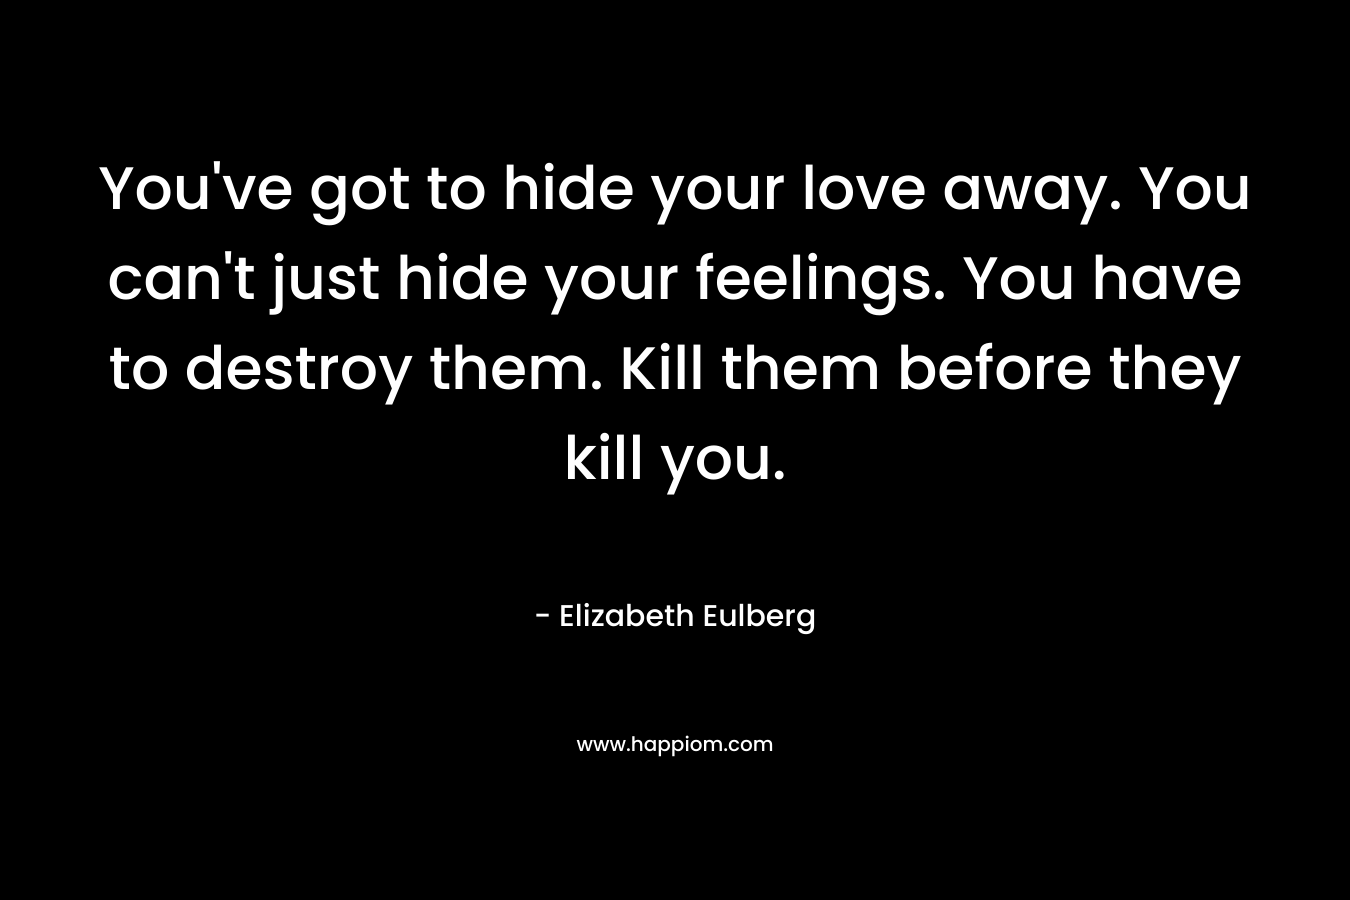 You've got to hide your love away. You can't just hide your feelings. You have to destroy them. Kill them before they kill you.